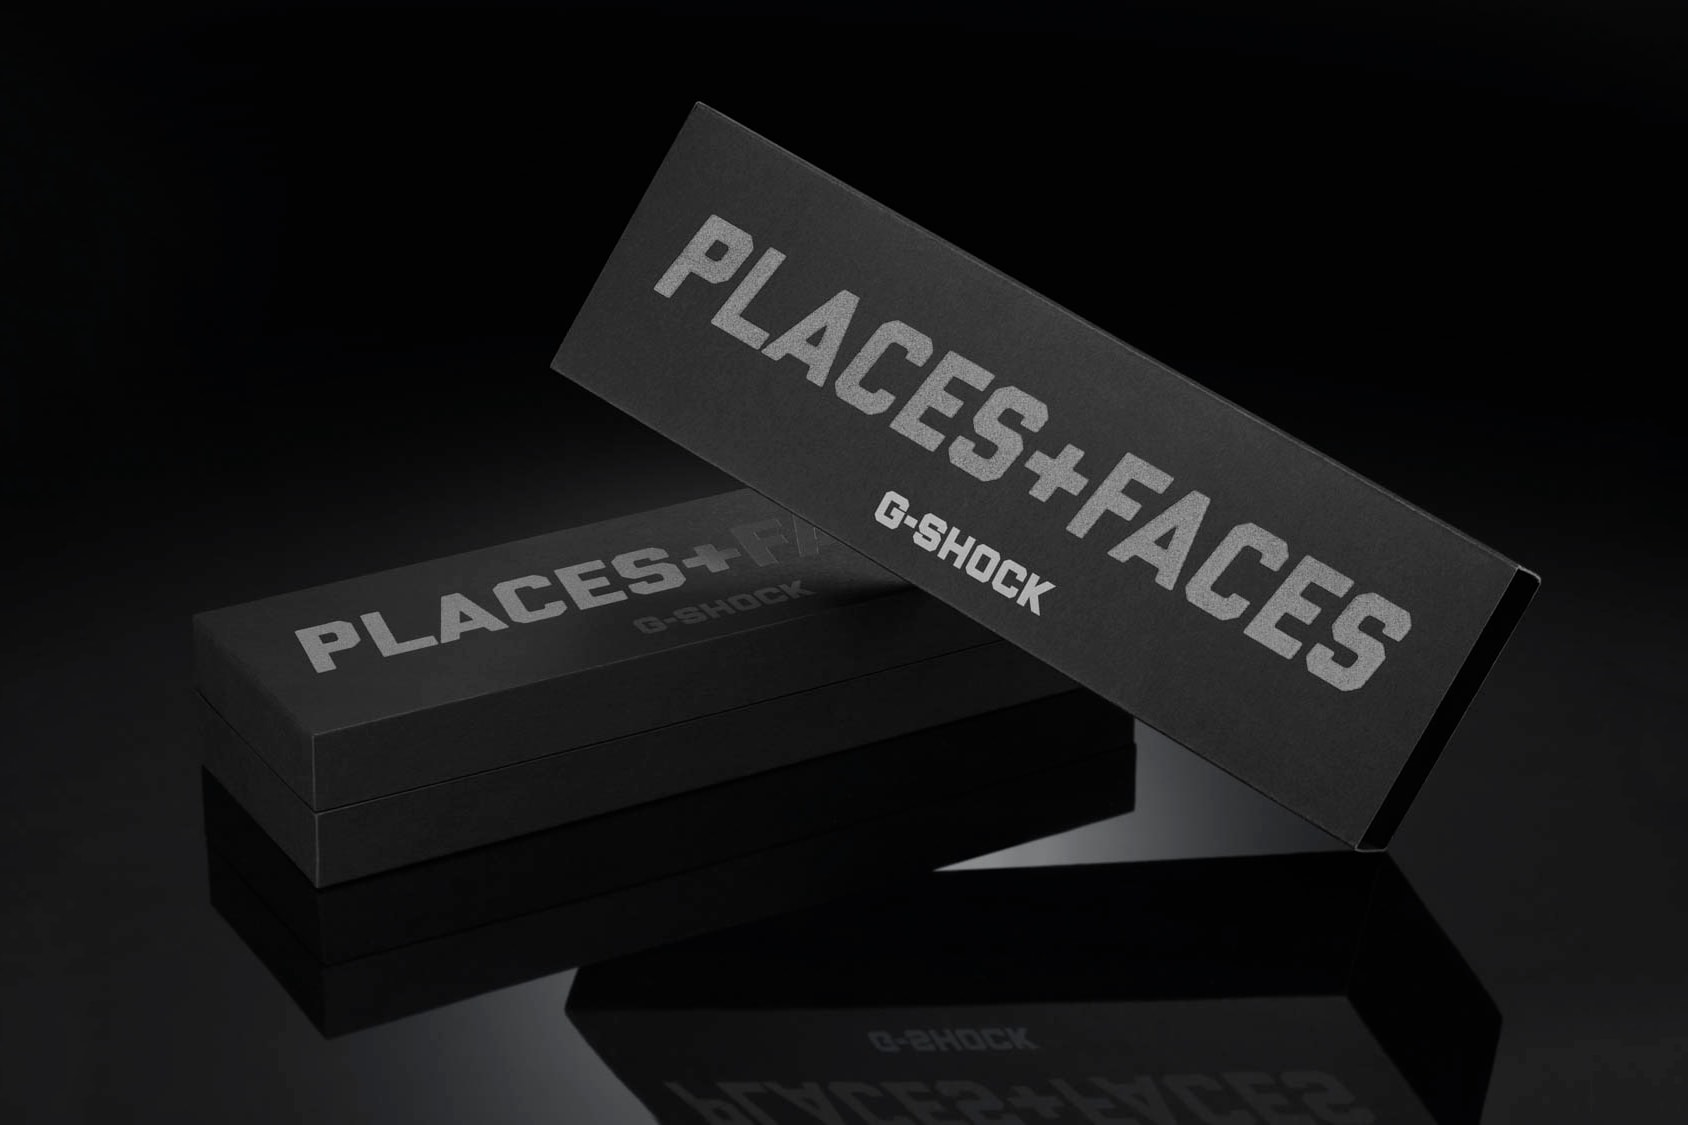 Places+Faces x G-Shock 聯乘 DW-6900 腕錶香港區發售情報